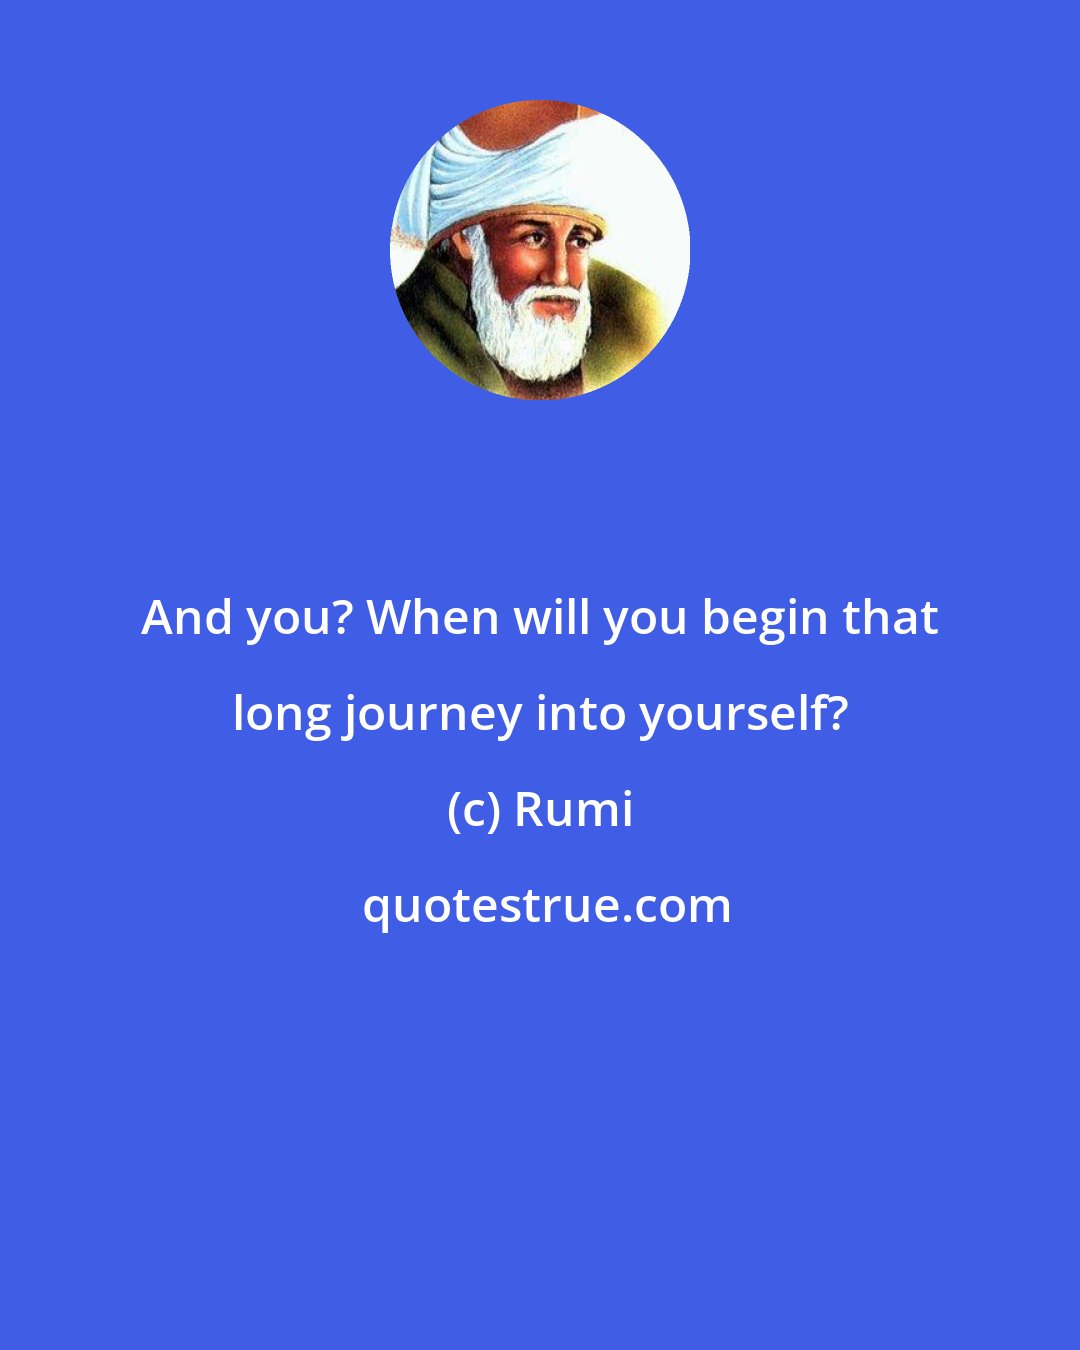 Rumi: And you? When will you begin that long journey into yourself?